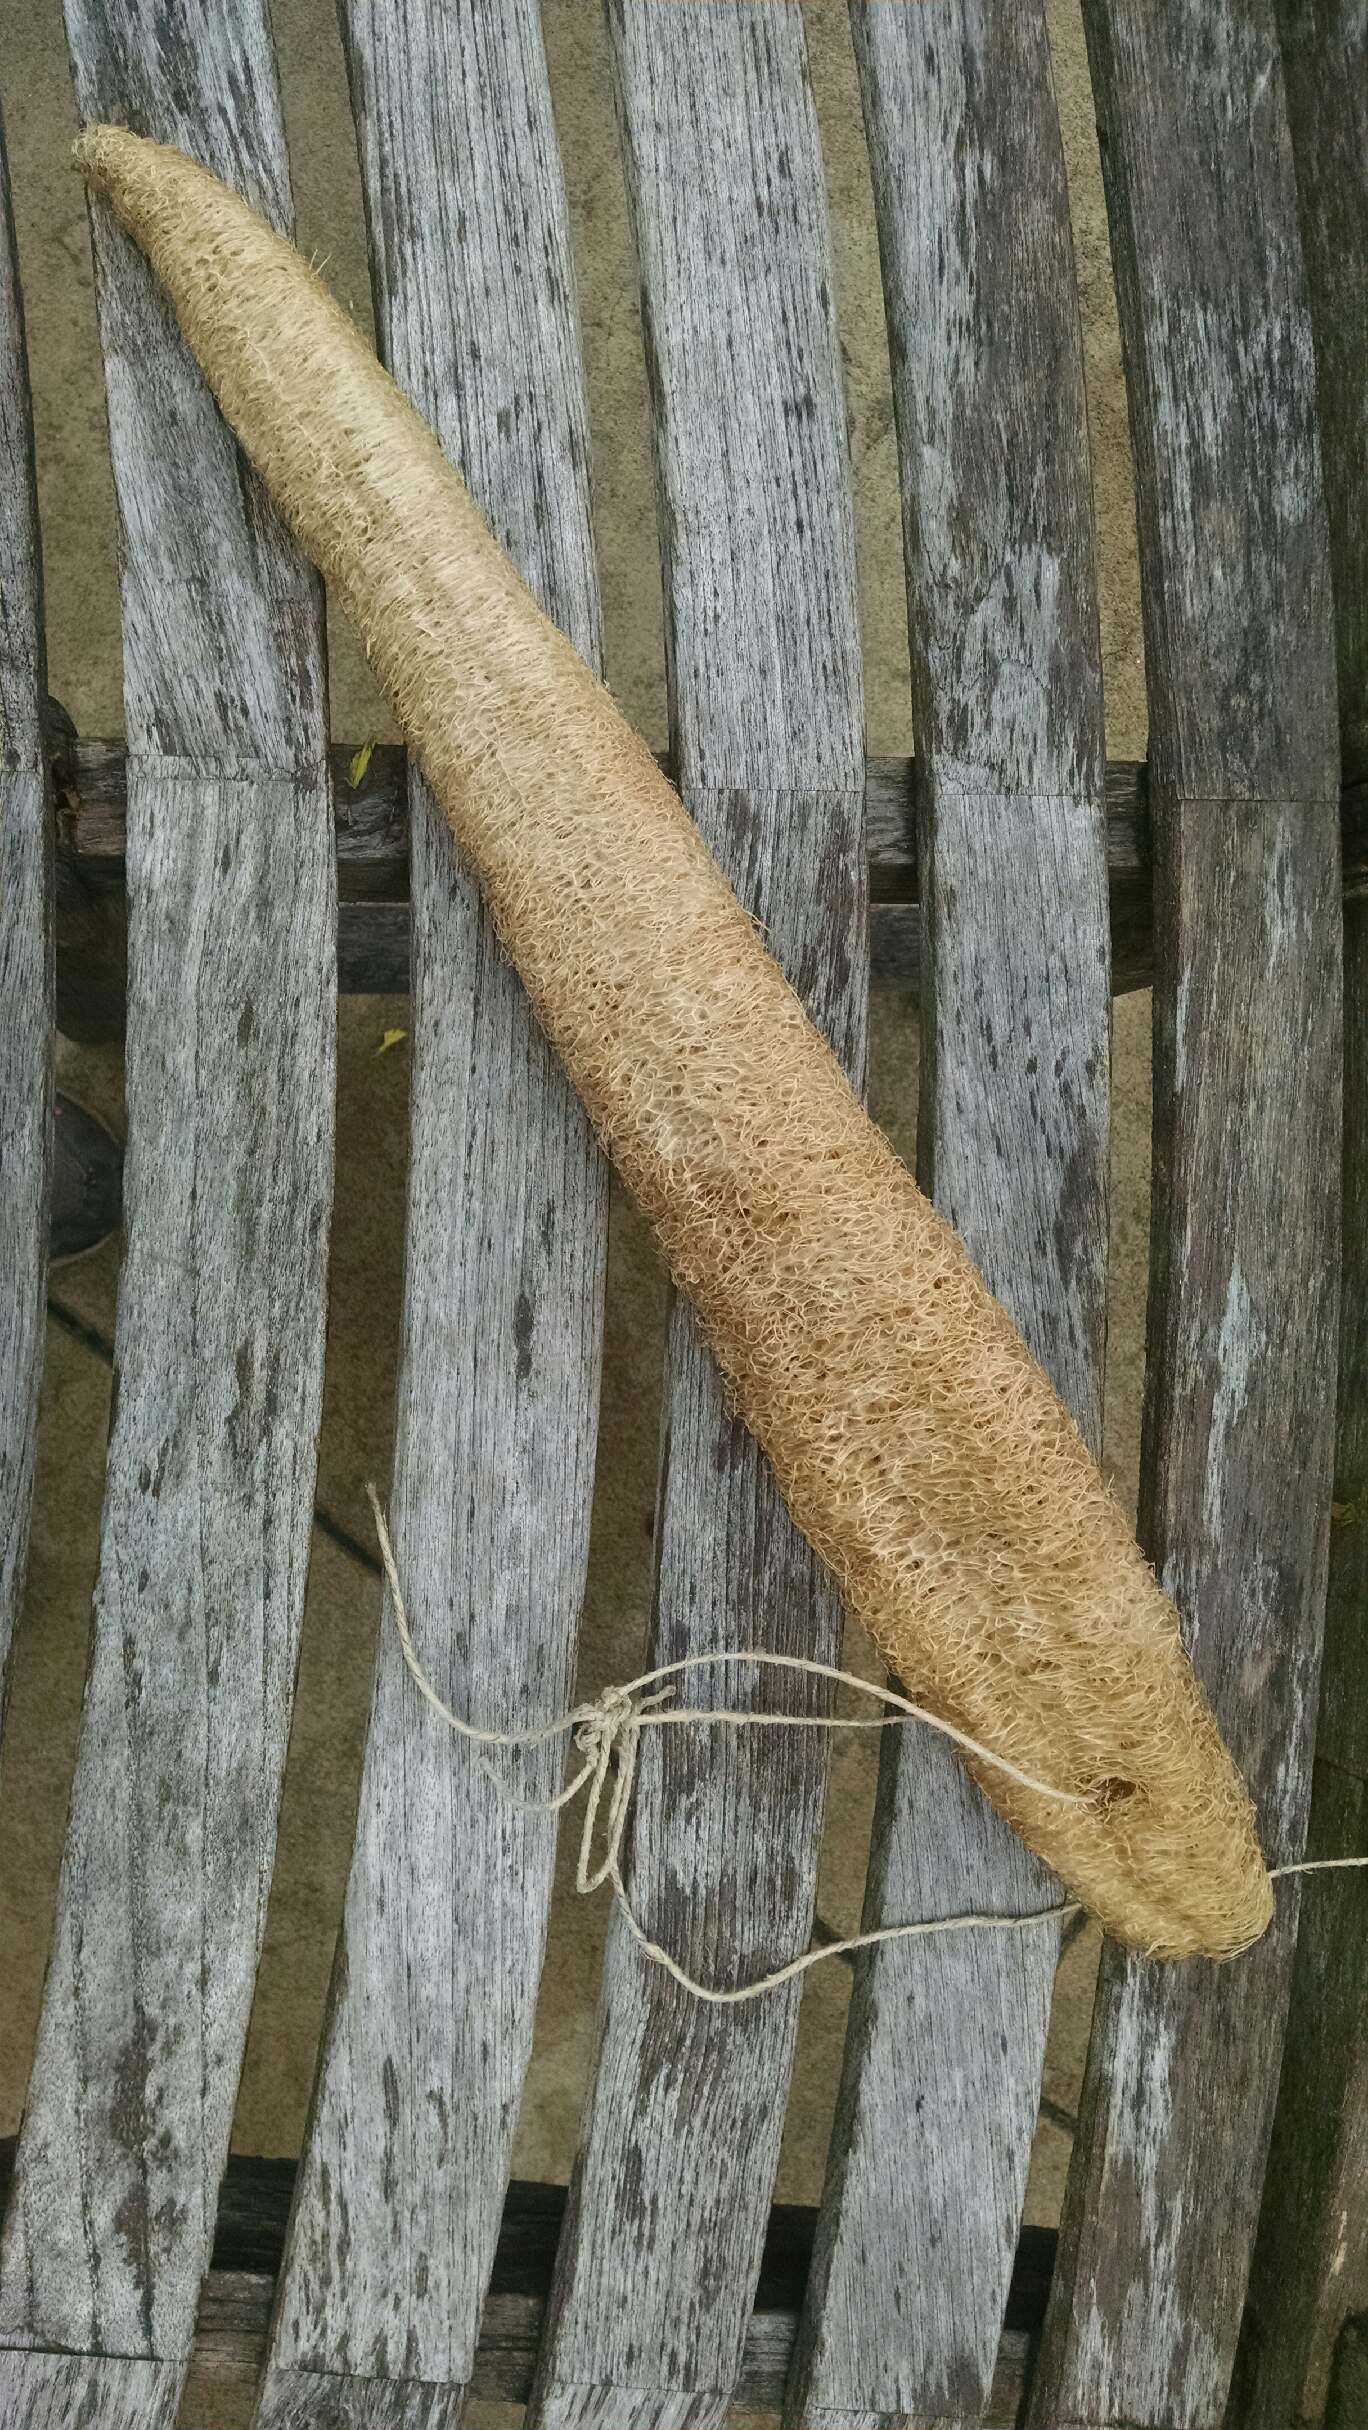 Dried fiber from the luffa typically is long and rough in texture.